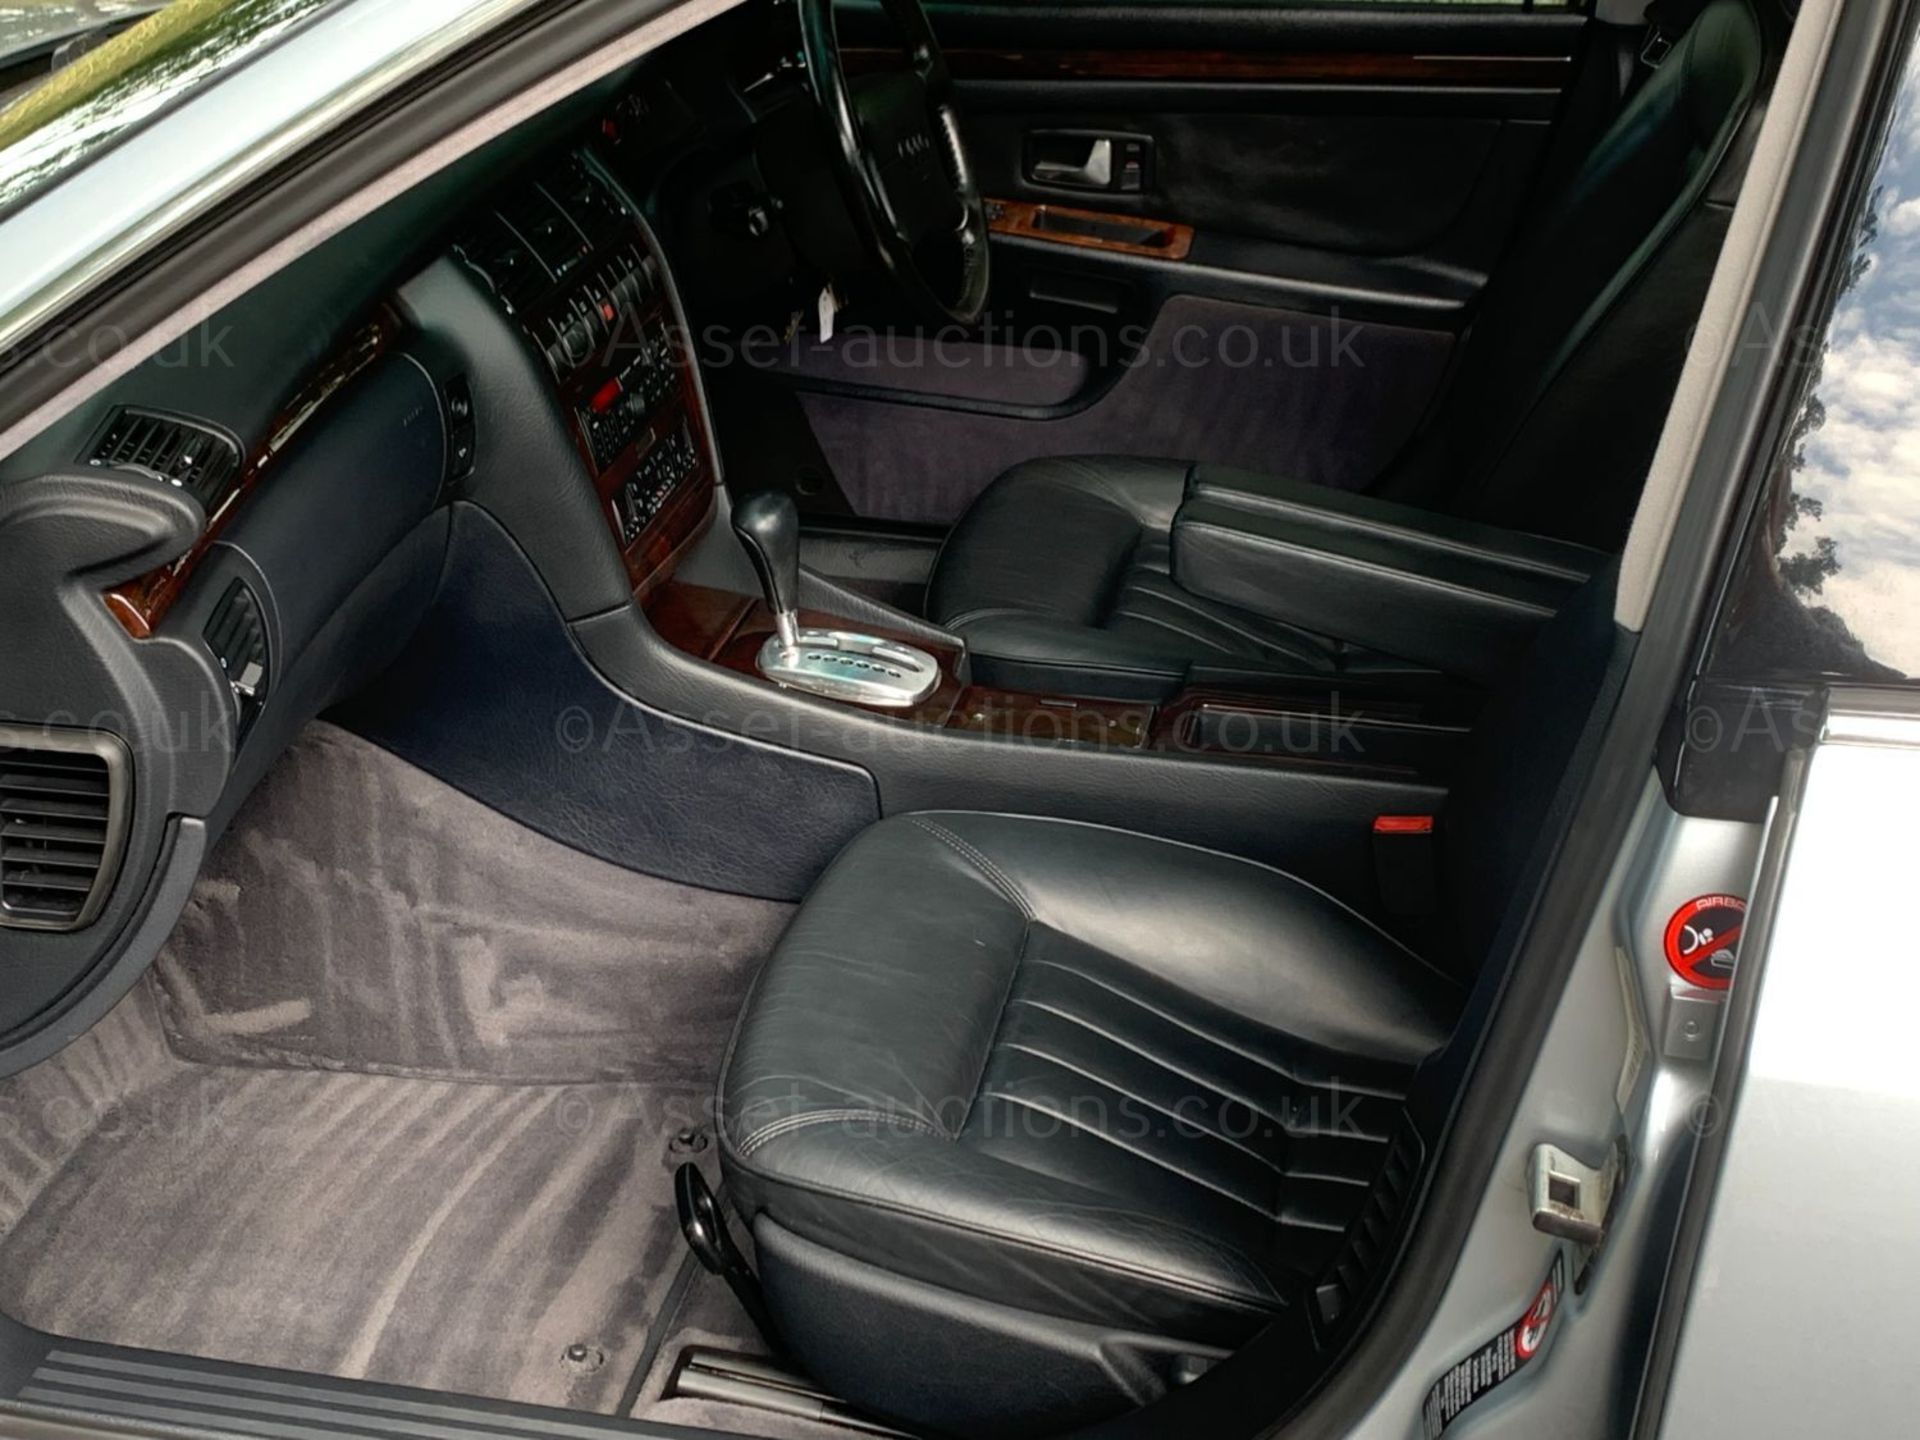 1997 AUDI A8 2.8 AUTO, GENUINE 63K MILES FROM NEW AUMINIUM SILVER, DARK BLUE LEATHER INTERIOR - Image 6 of 10